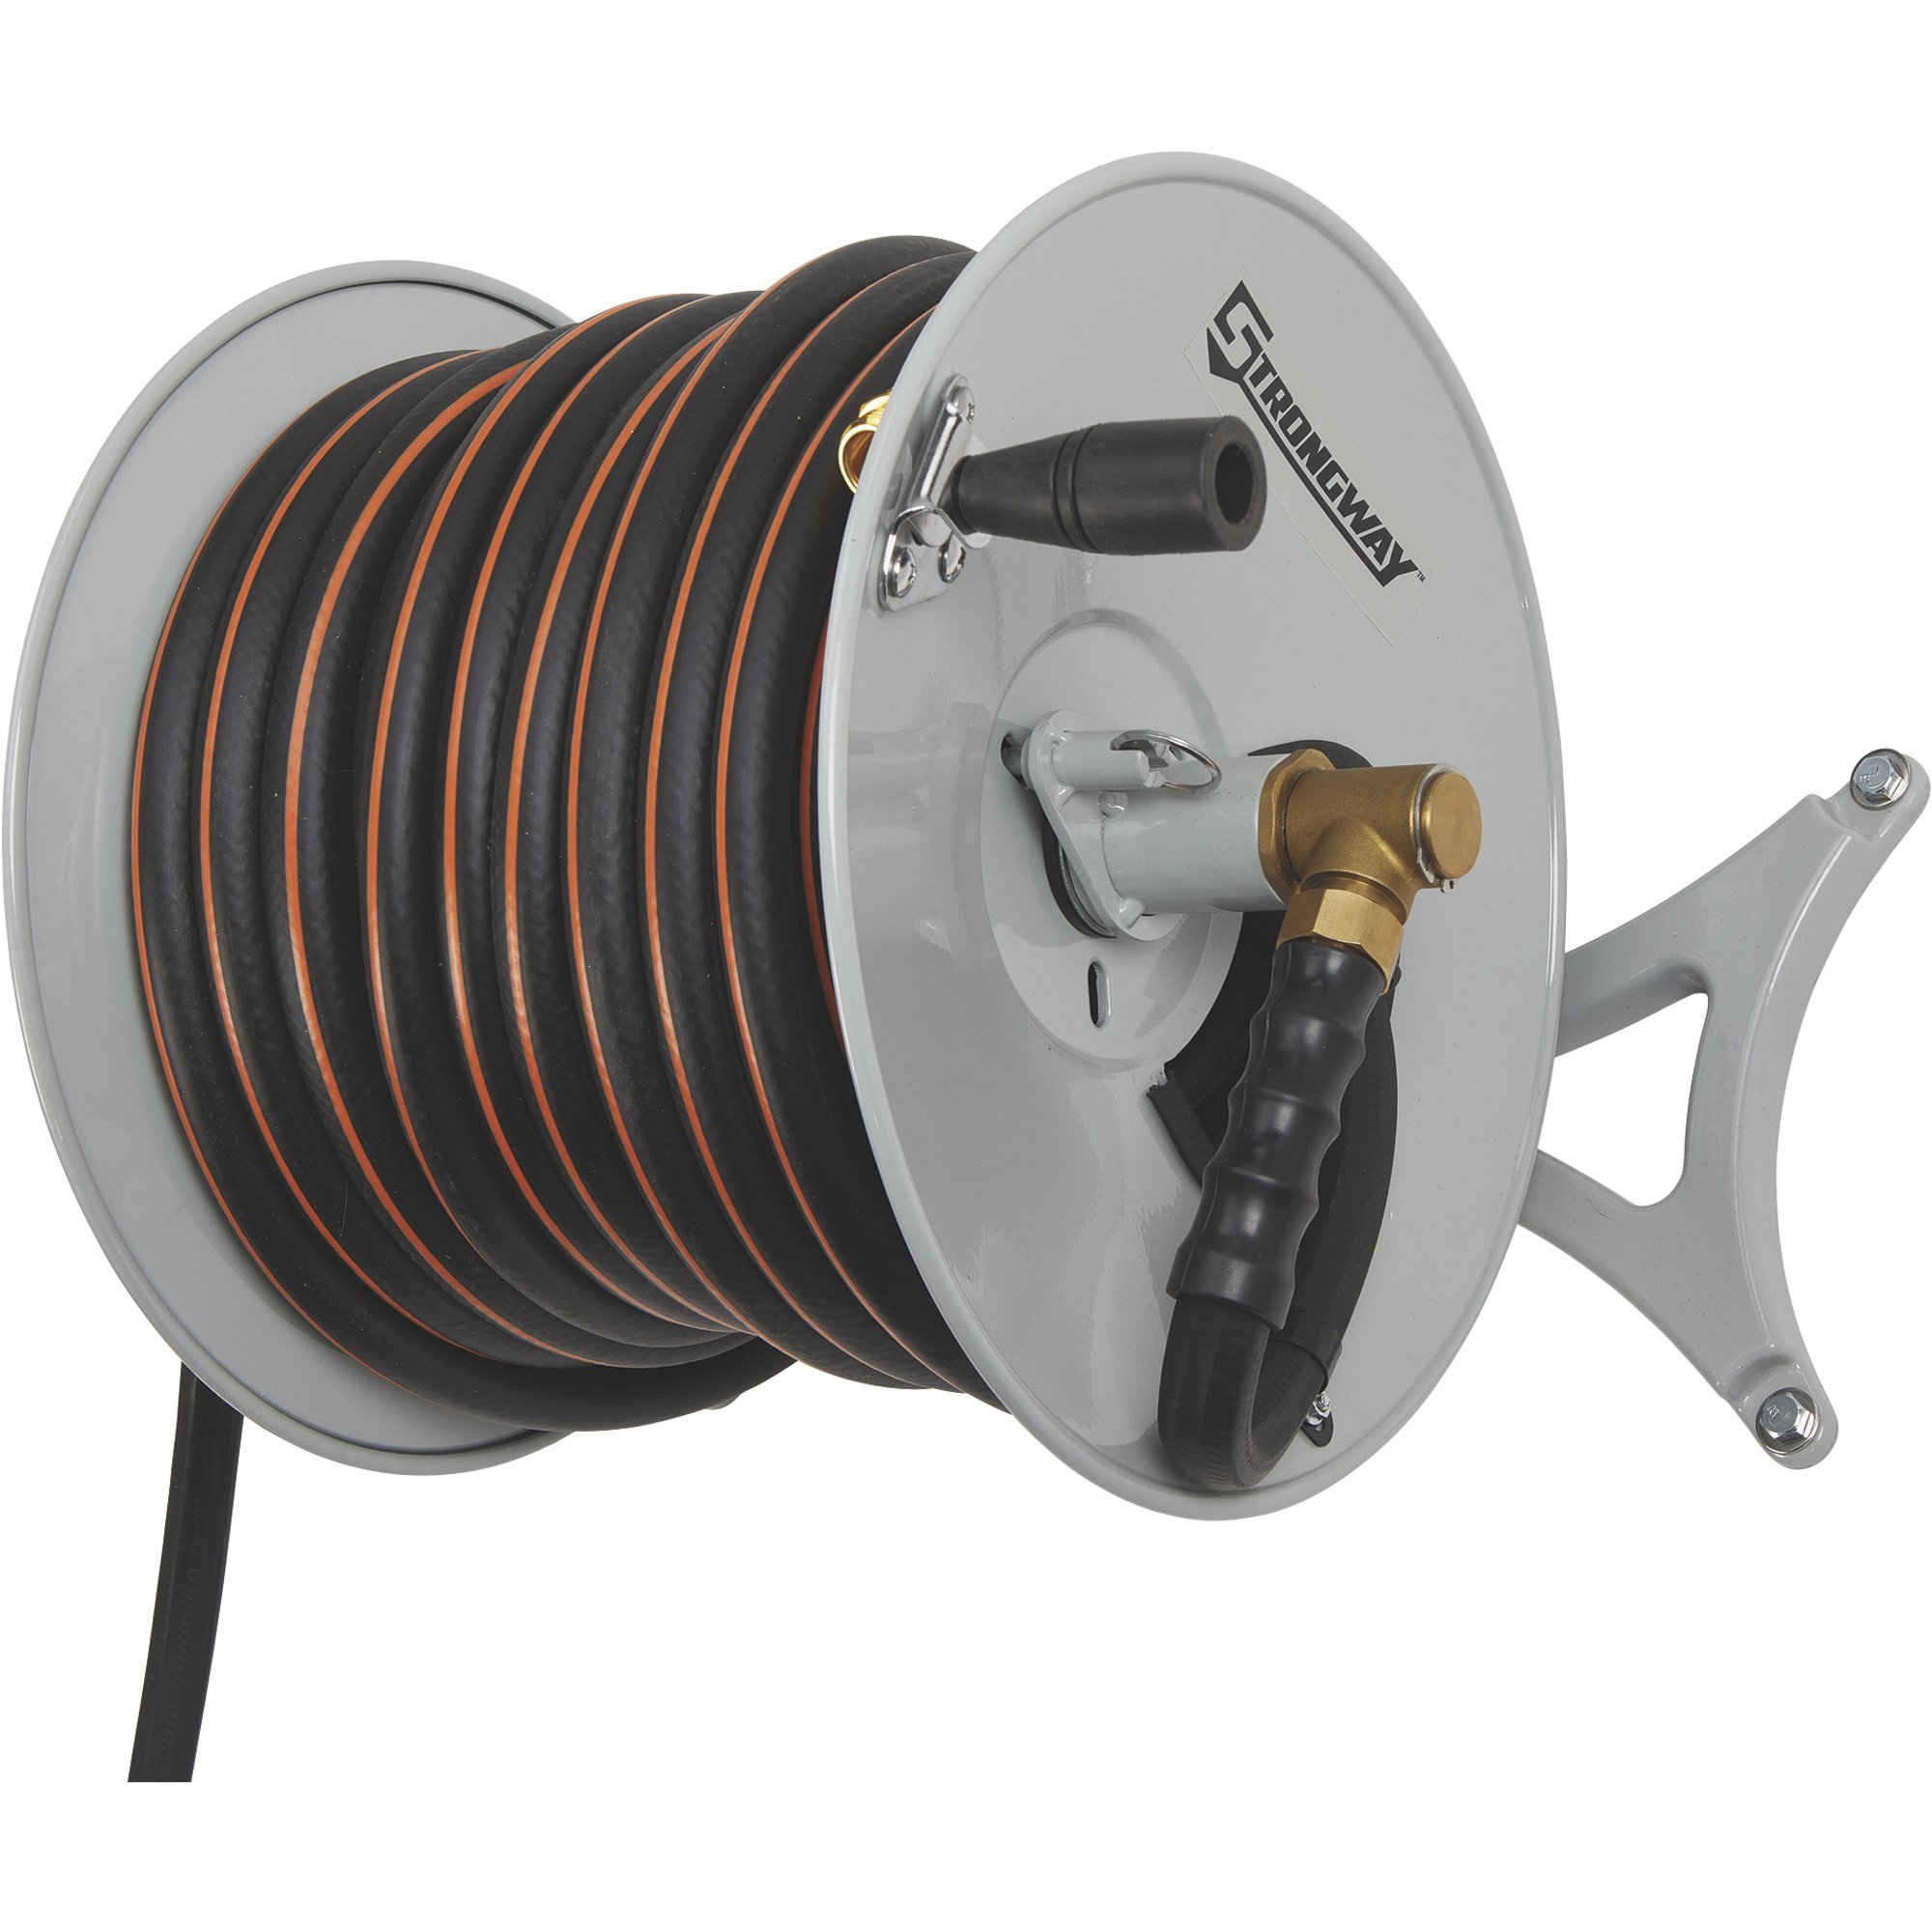 Strongway Parallel or Perpendicular Wall-Mount Garden Hose Reel - Holds  5/8in. x 150ft. Hose